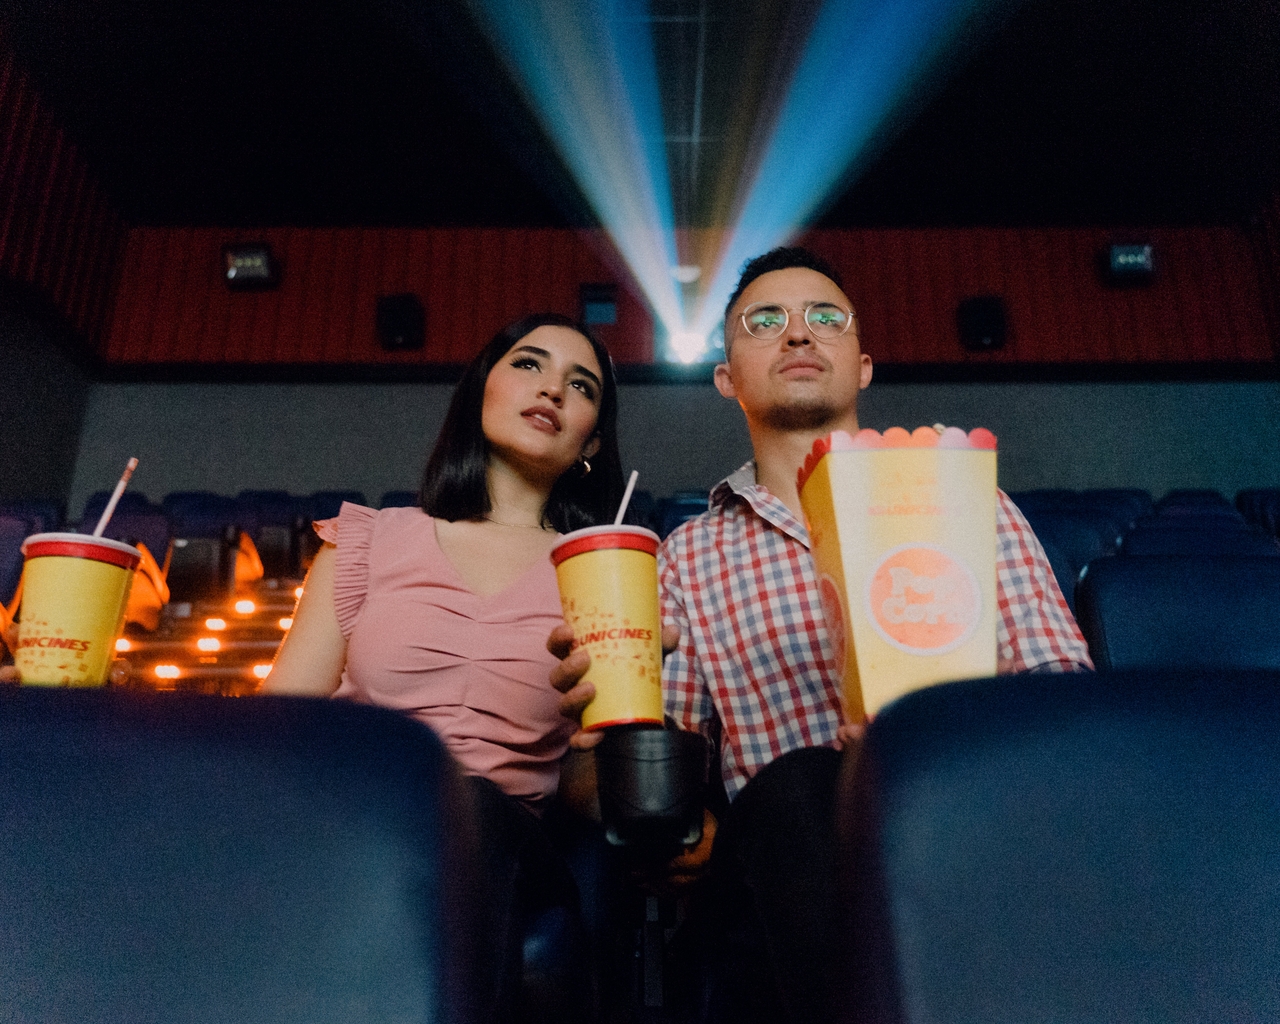 A photo shows man and woman eating popcorn in cinema while watching a movie